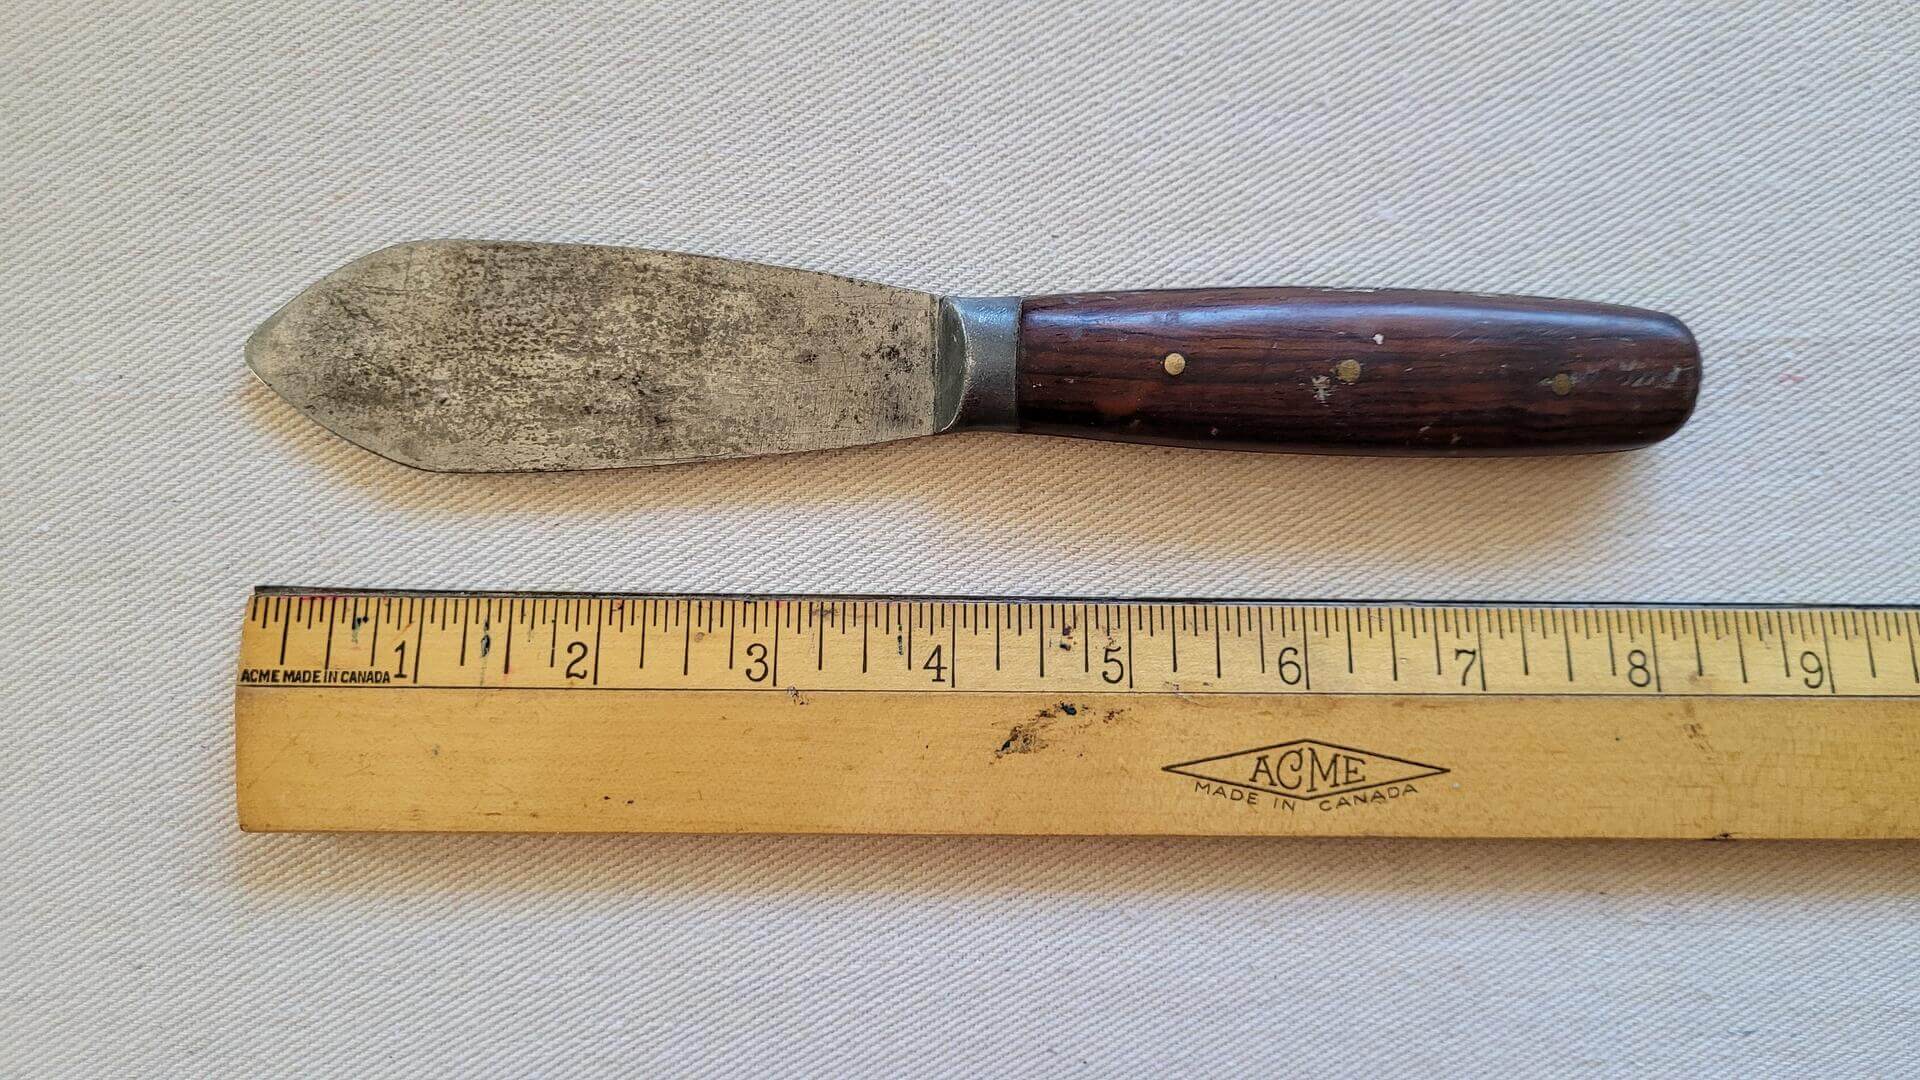 Rare and beautiful antique Stacey Brothers artist pallete knife and sculpting spatula with rosewood handle 8 inches long. Vintage made in Sheffield England collectible putty knife and spreader tool by 19th century knife maker